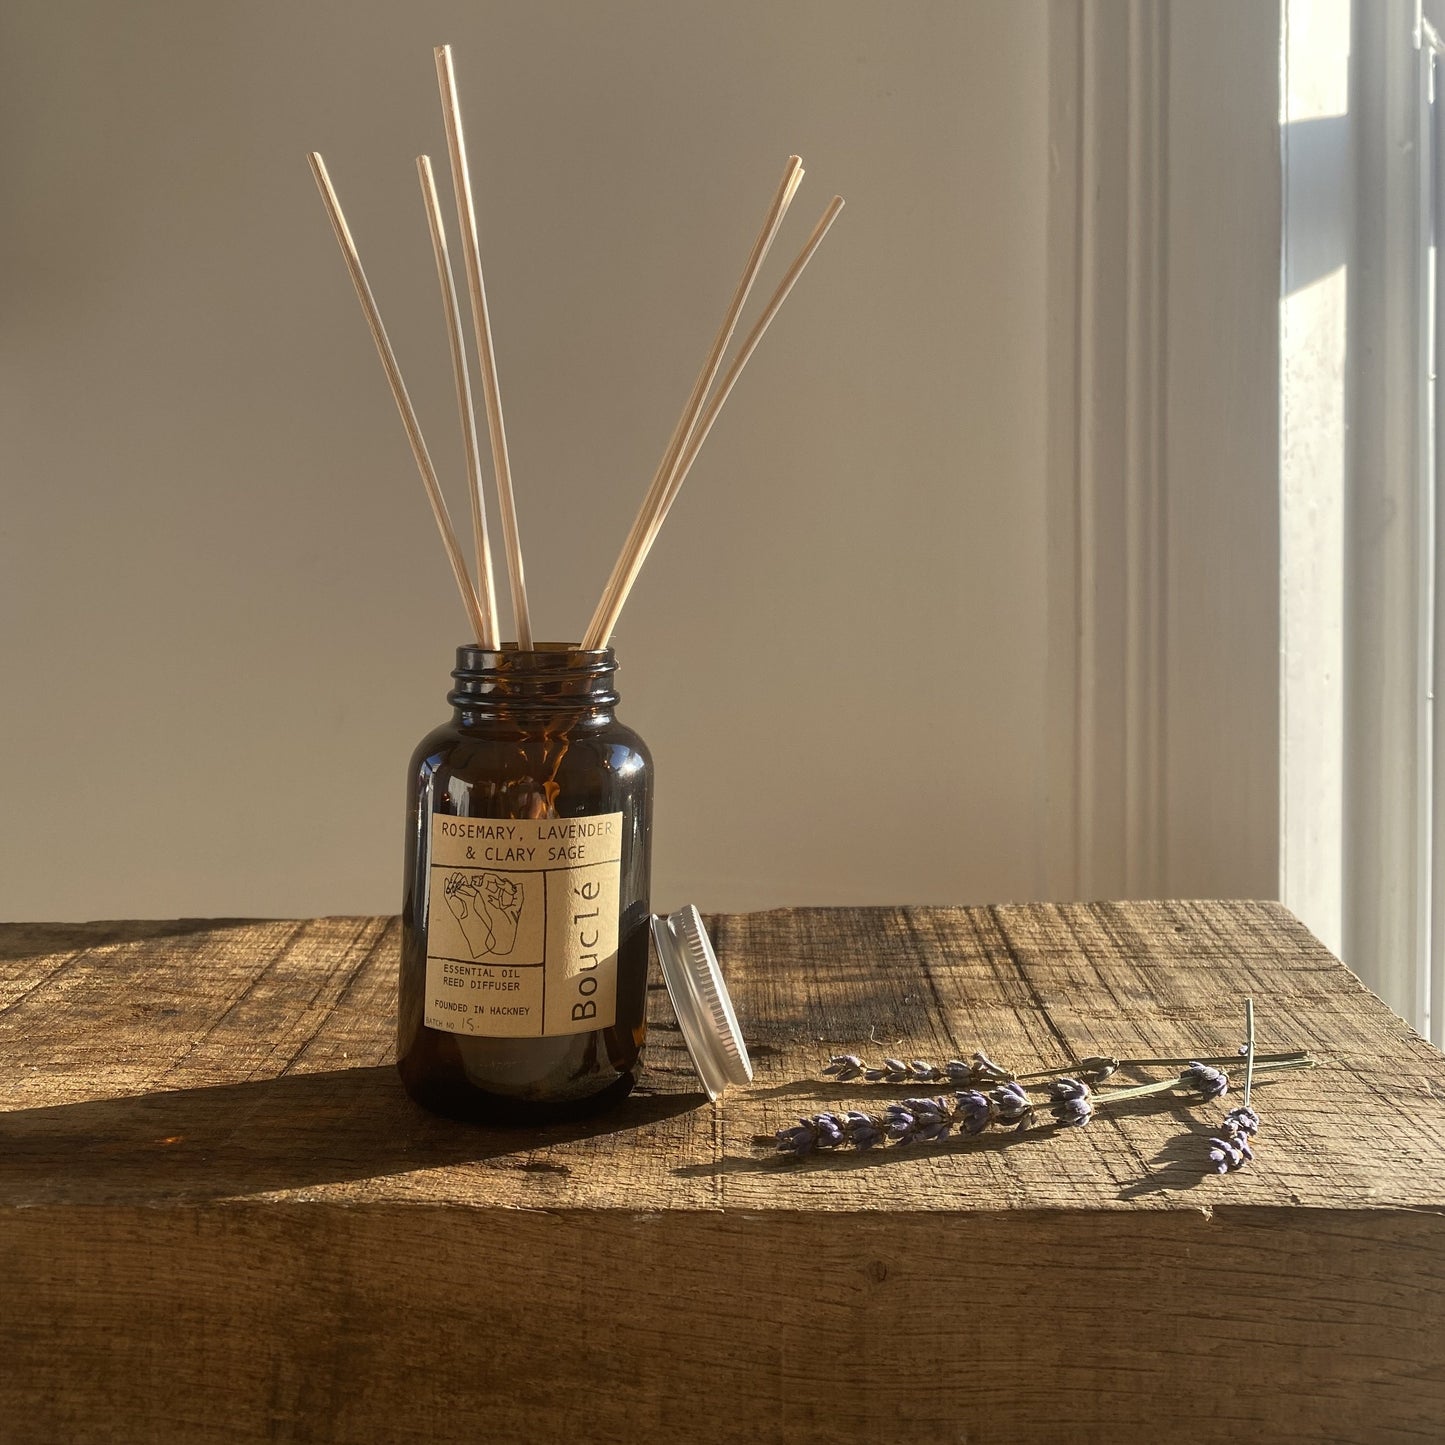 Bouclé London Rosemary, lavender & clary sage rattan reed diffuser for flame free relaxing home fragrance alongside dried lavender